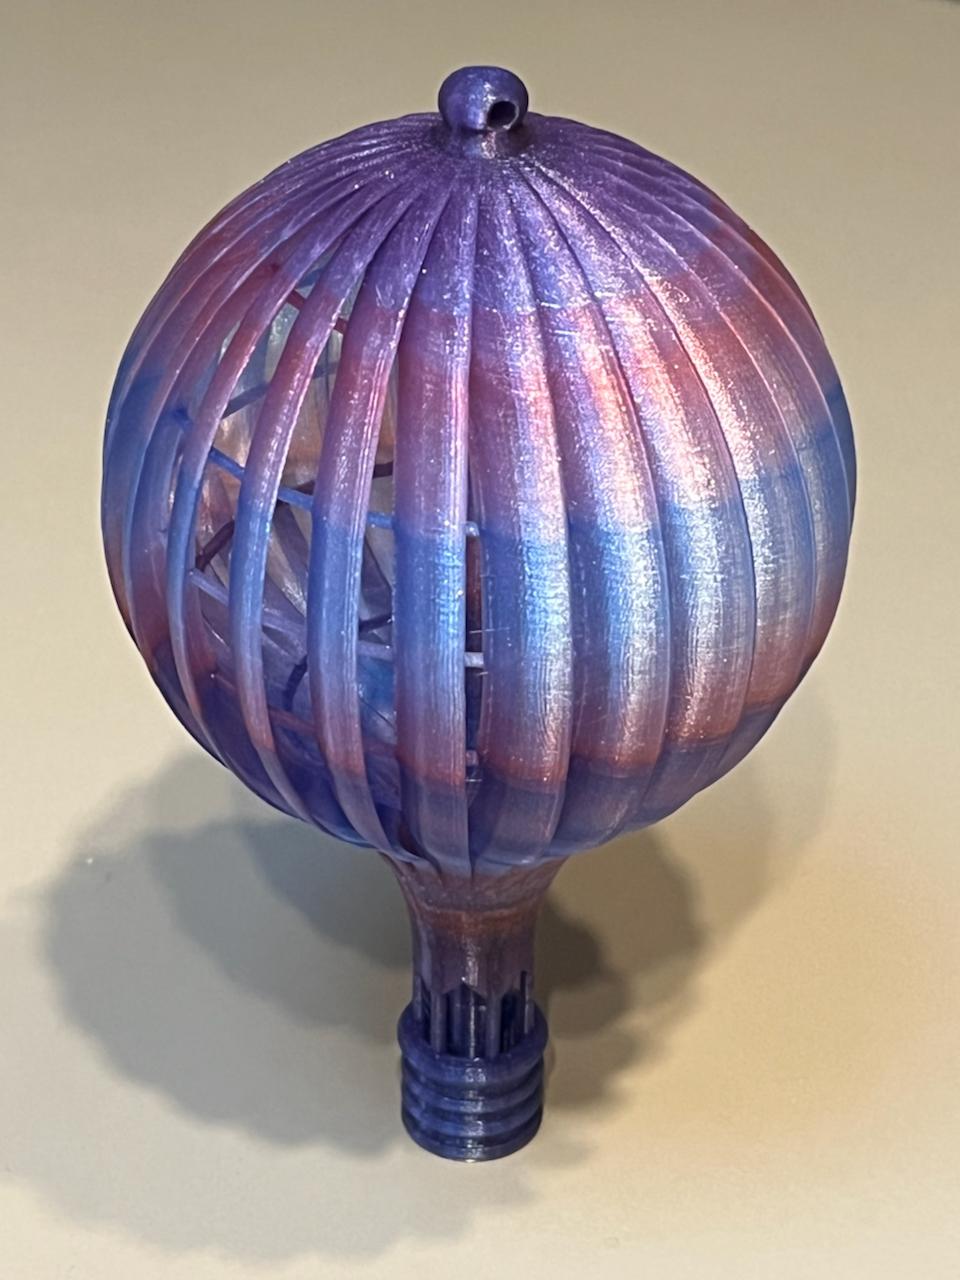 Wind Spinner Balloon - Printed in Nebula Multicolor.  This model is what pushed me over the edge and inspired me to purchase a 3D printer.  The print turned out great.  Had to scale it to 95% because of the height.   - 3d model